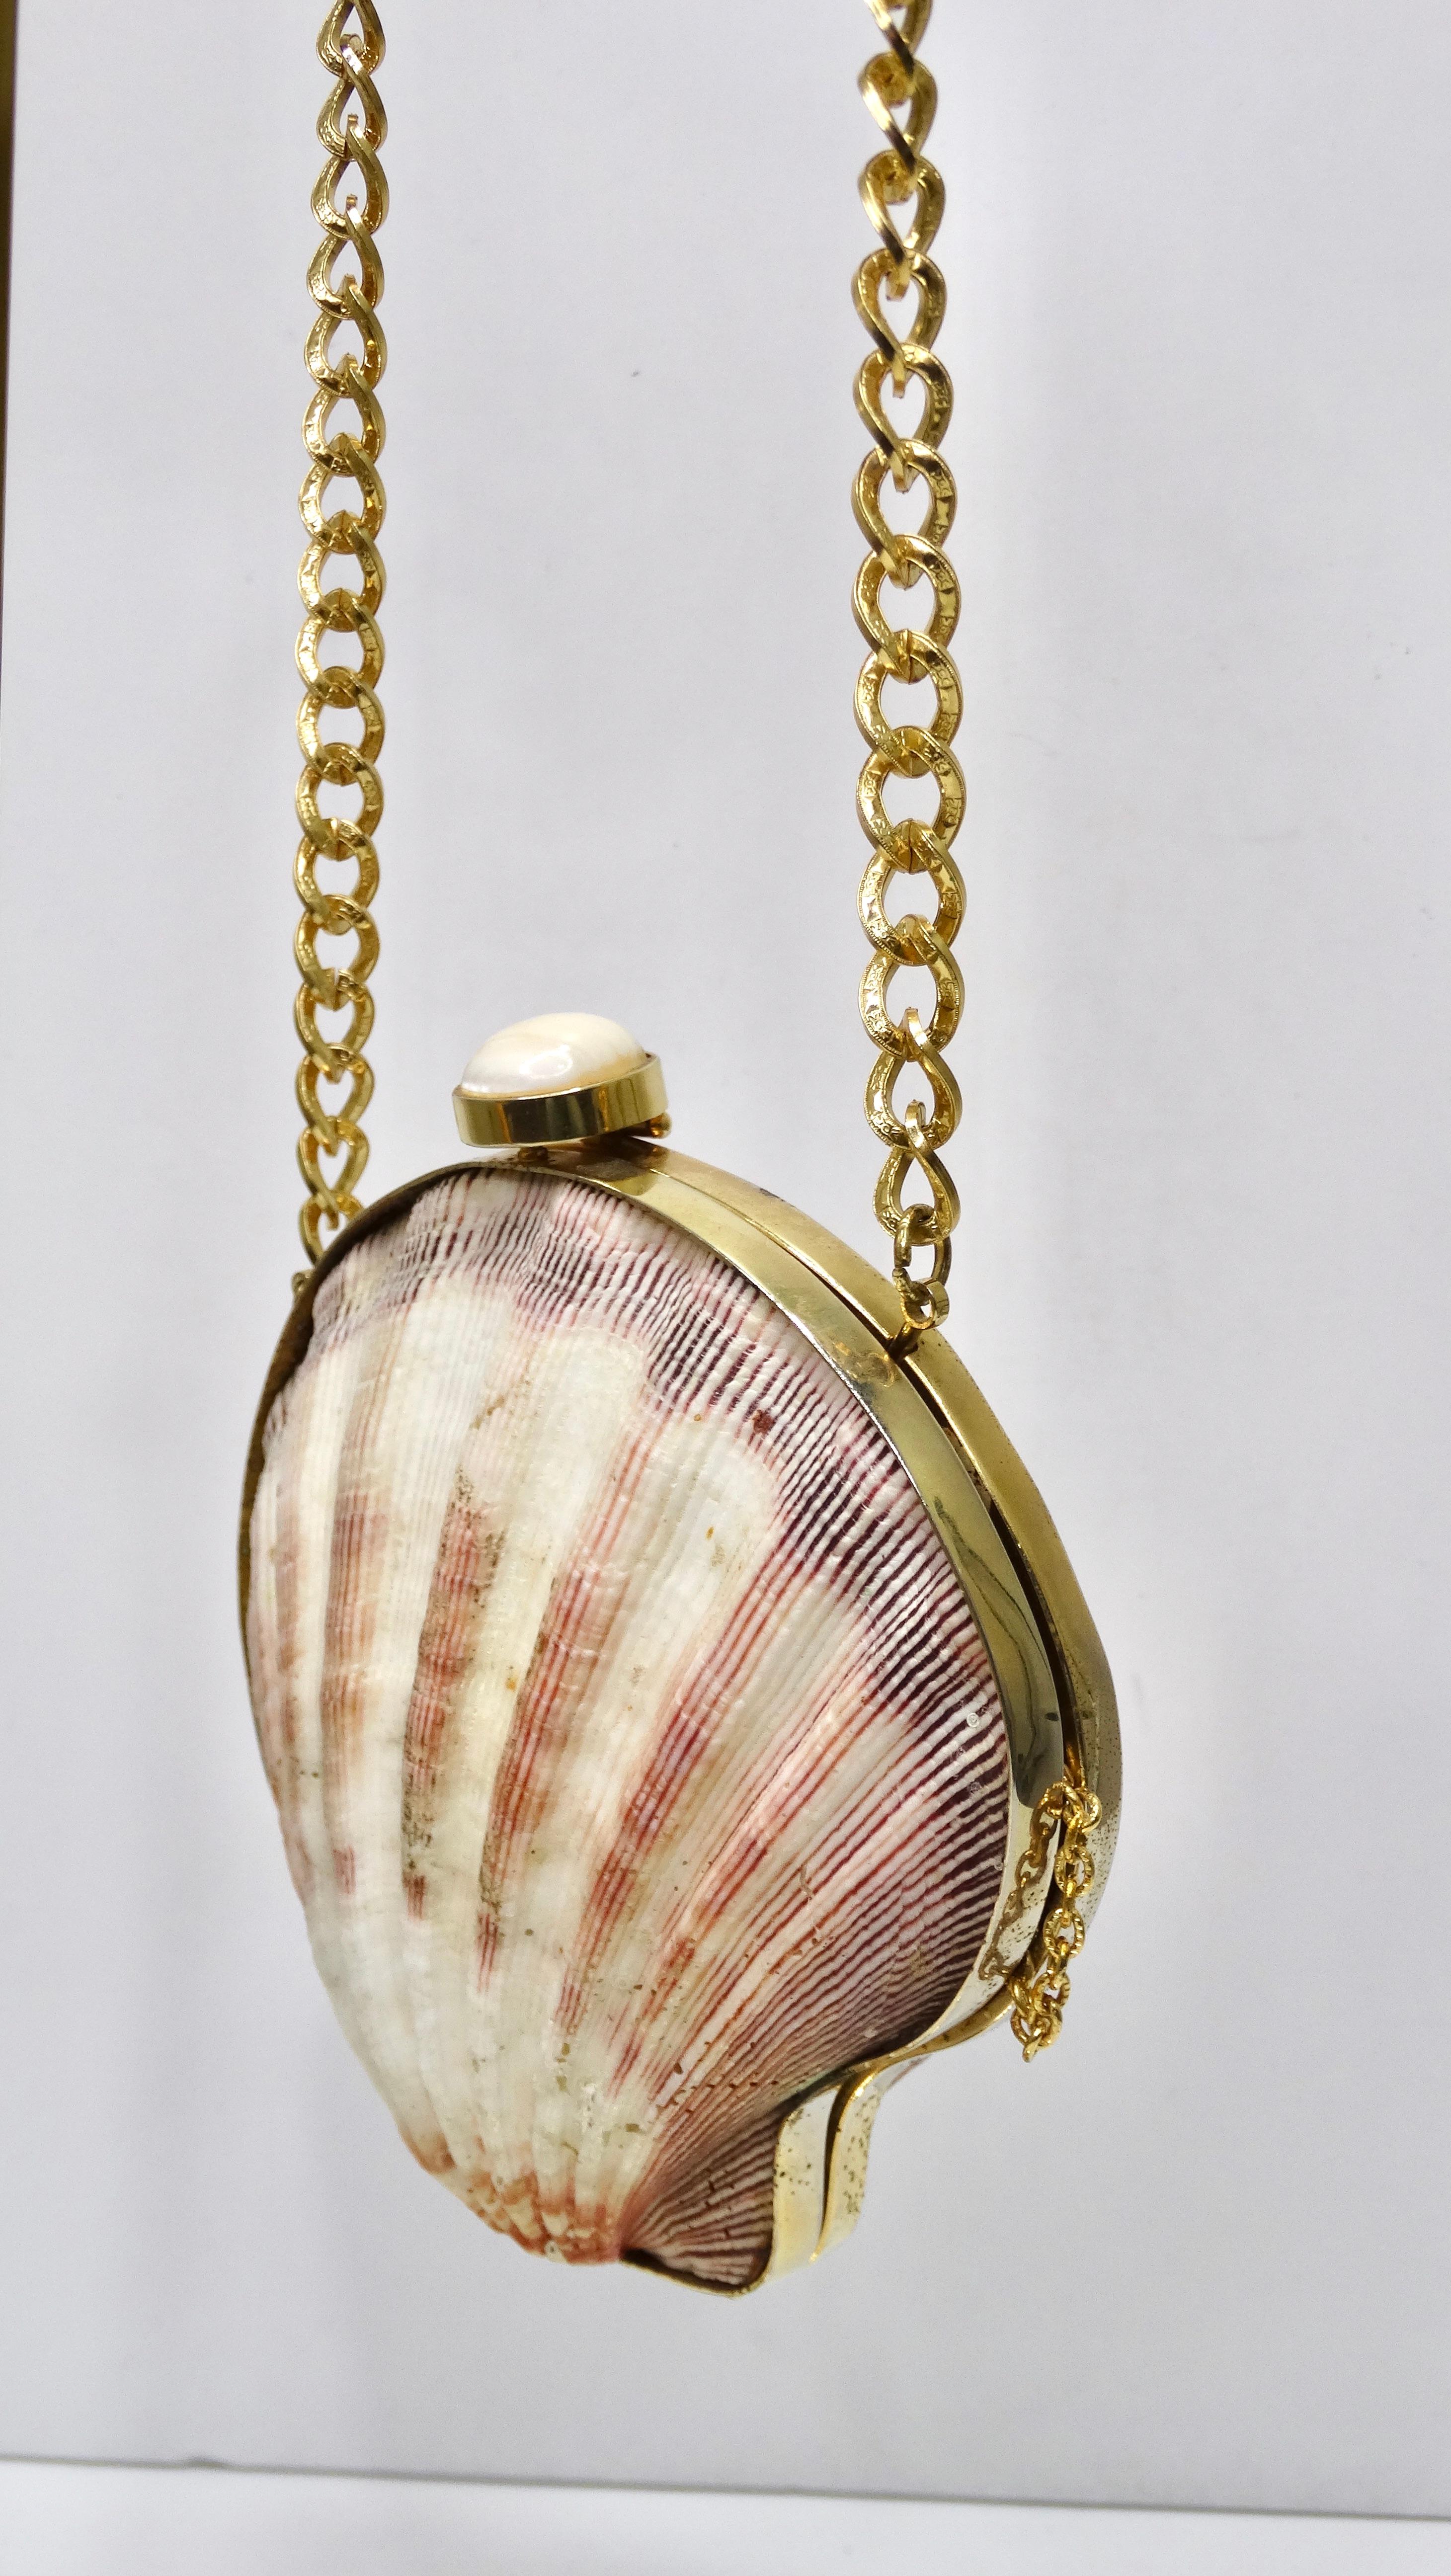 Women's or Men's Vintage Clam Seashell Evening Bag For Sale